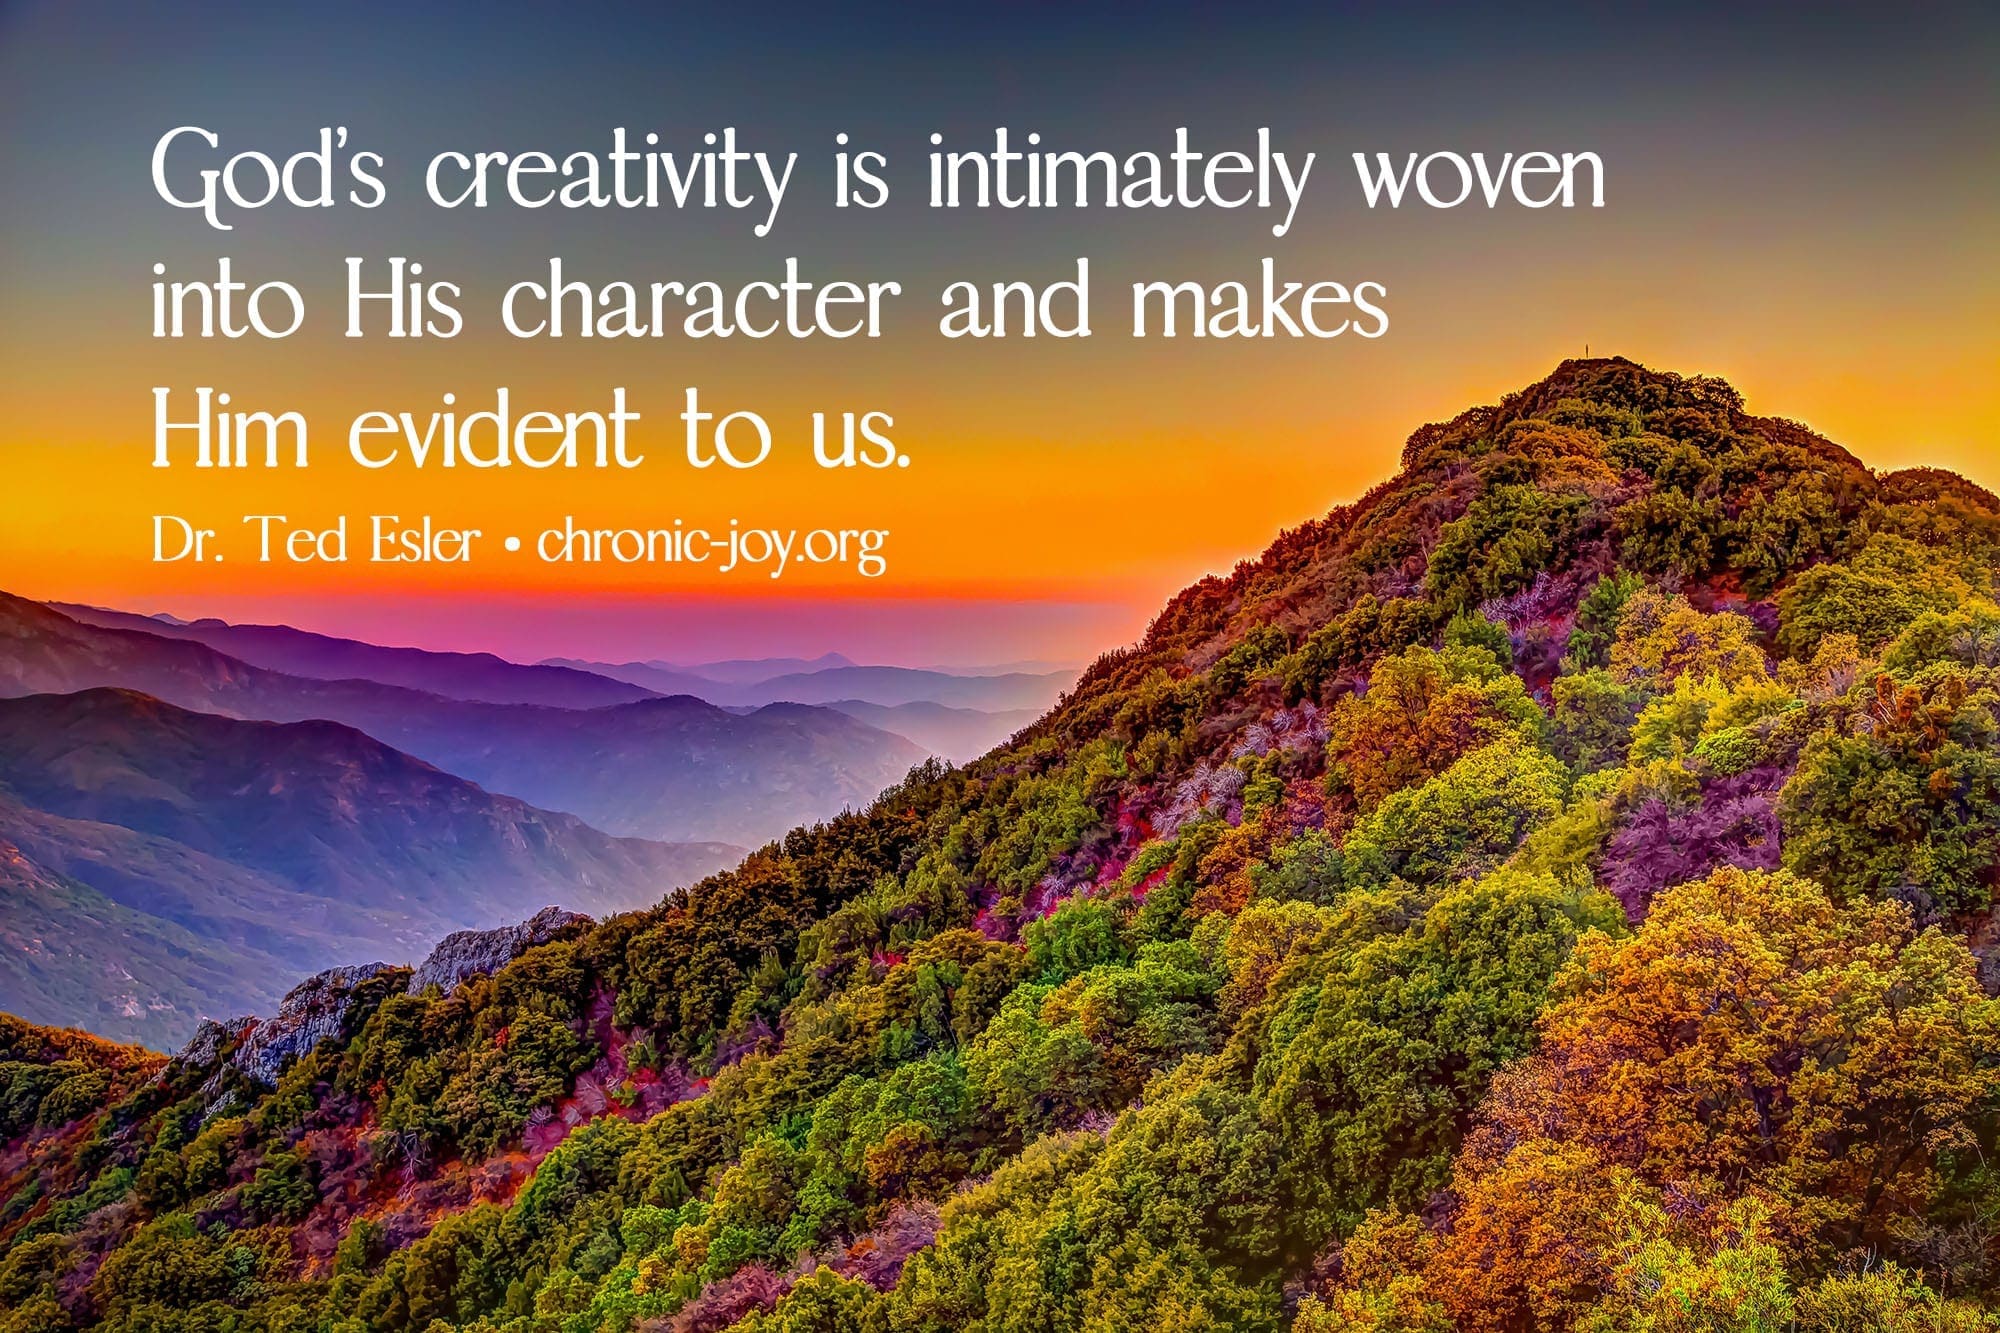 "God’s creativity is intimately woven into His character and makes Him evident to us." Dr. Ted Esler